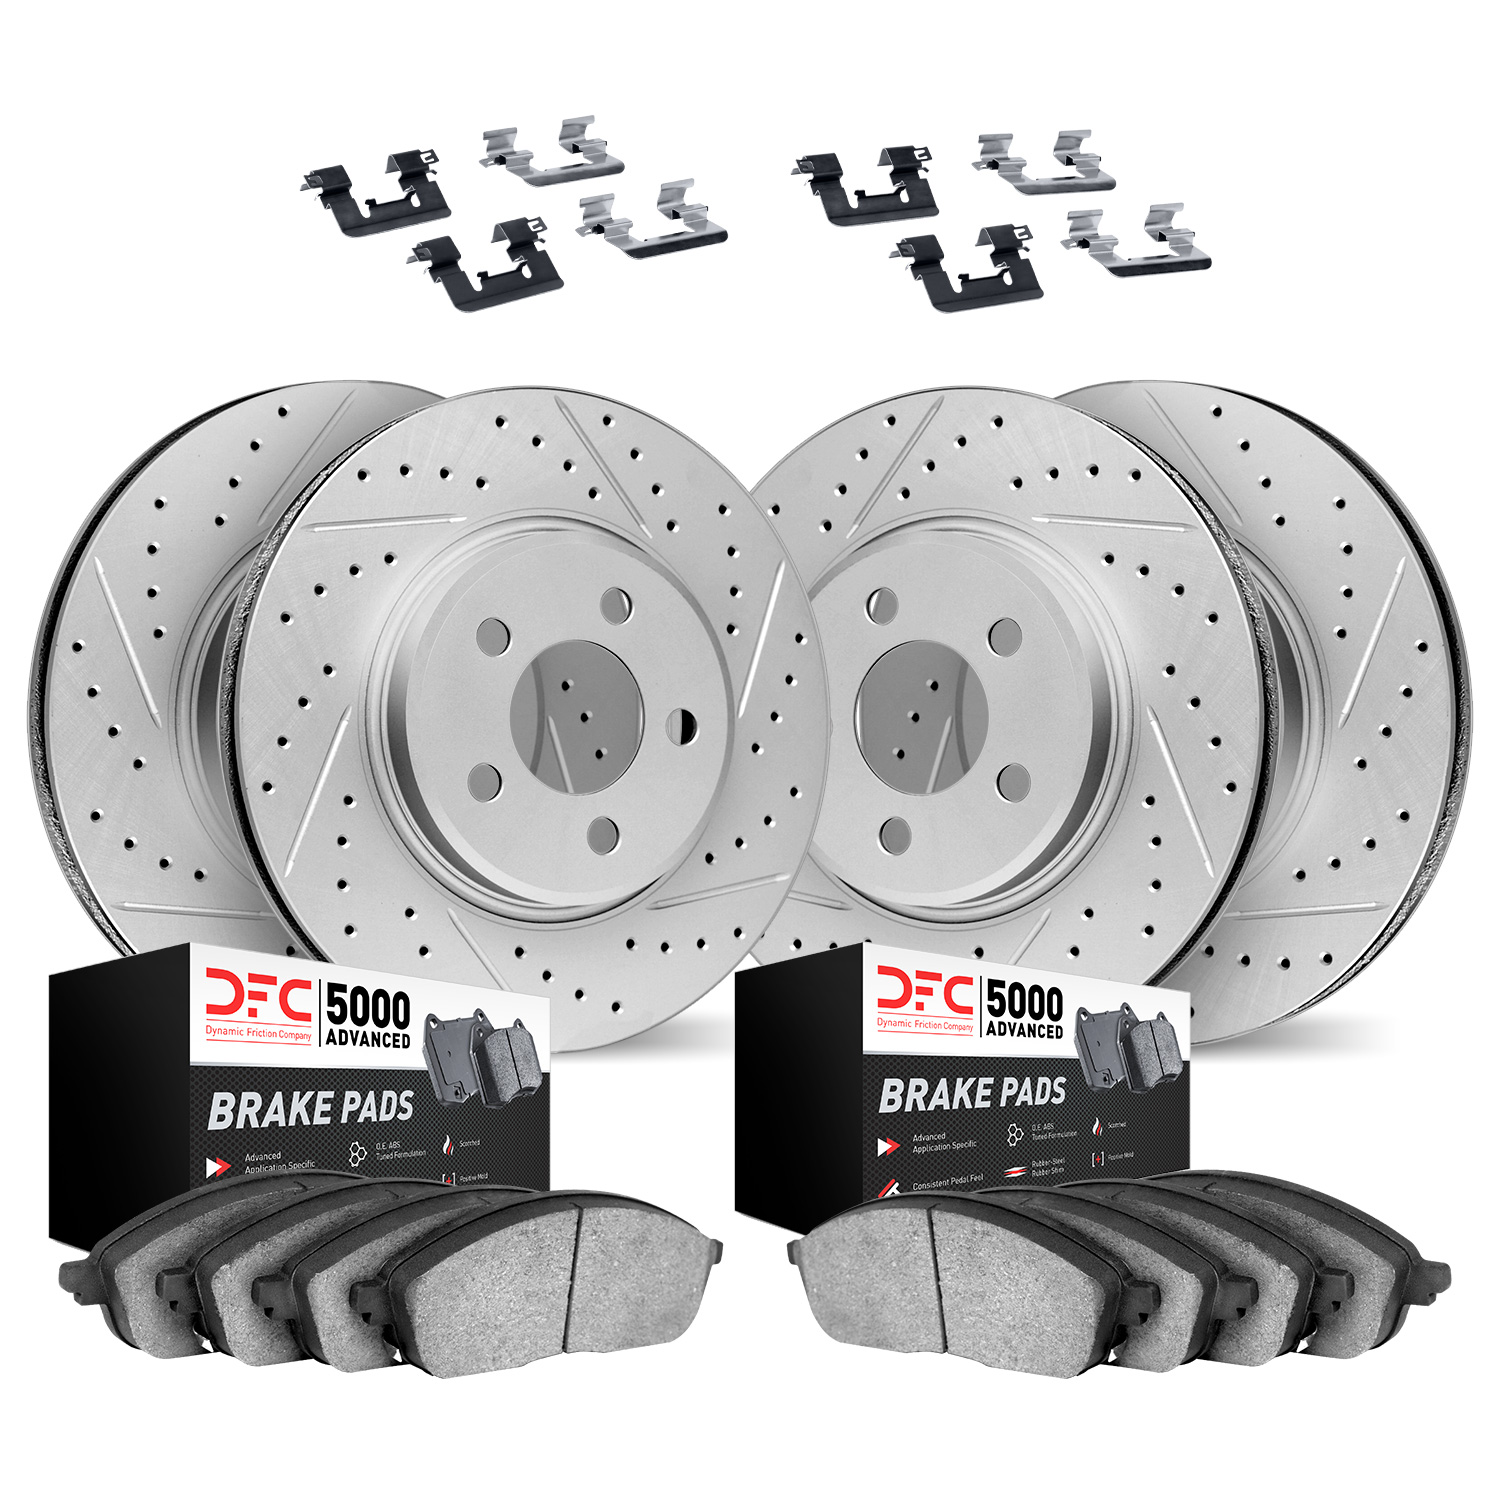 2514-47304 Geoperformance Drilled/Slotted Rotors w/5000 Advanced Brake Pads Kit & Hardware, 2007-2015 GM, Position: Front and Re